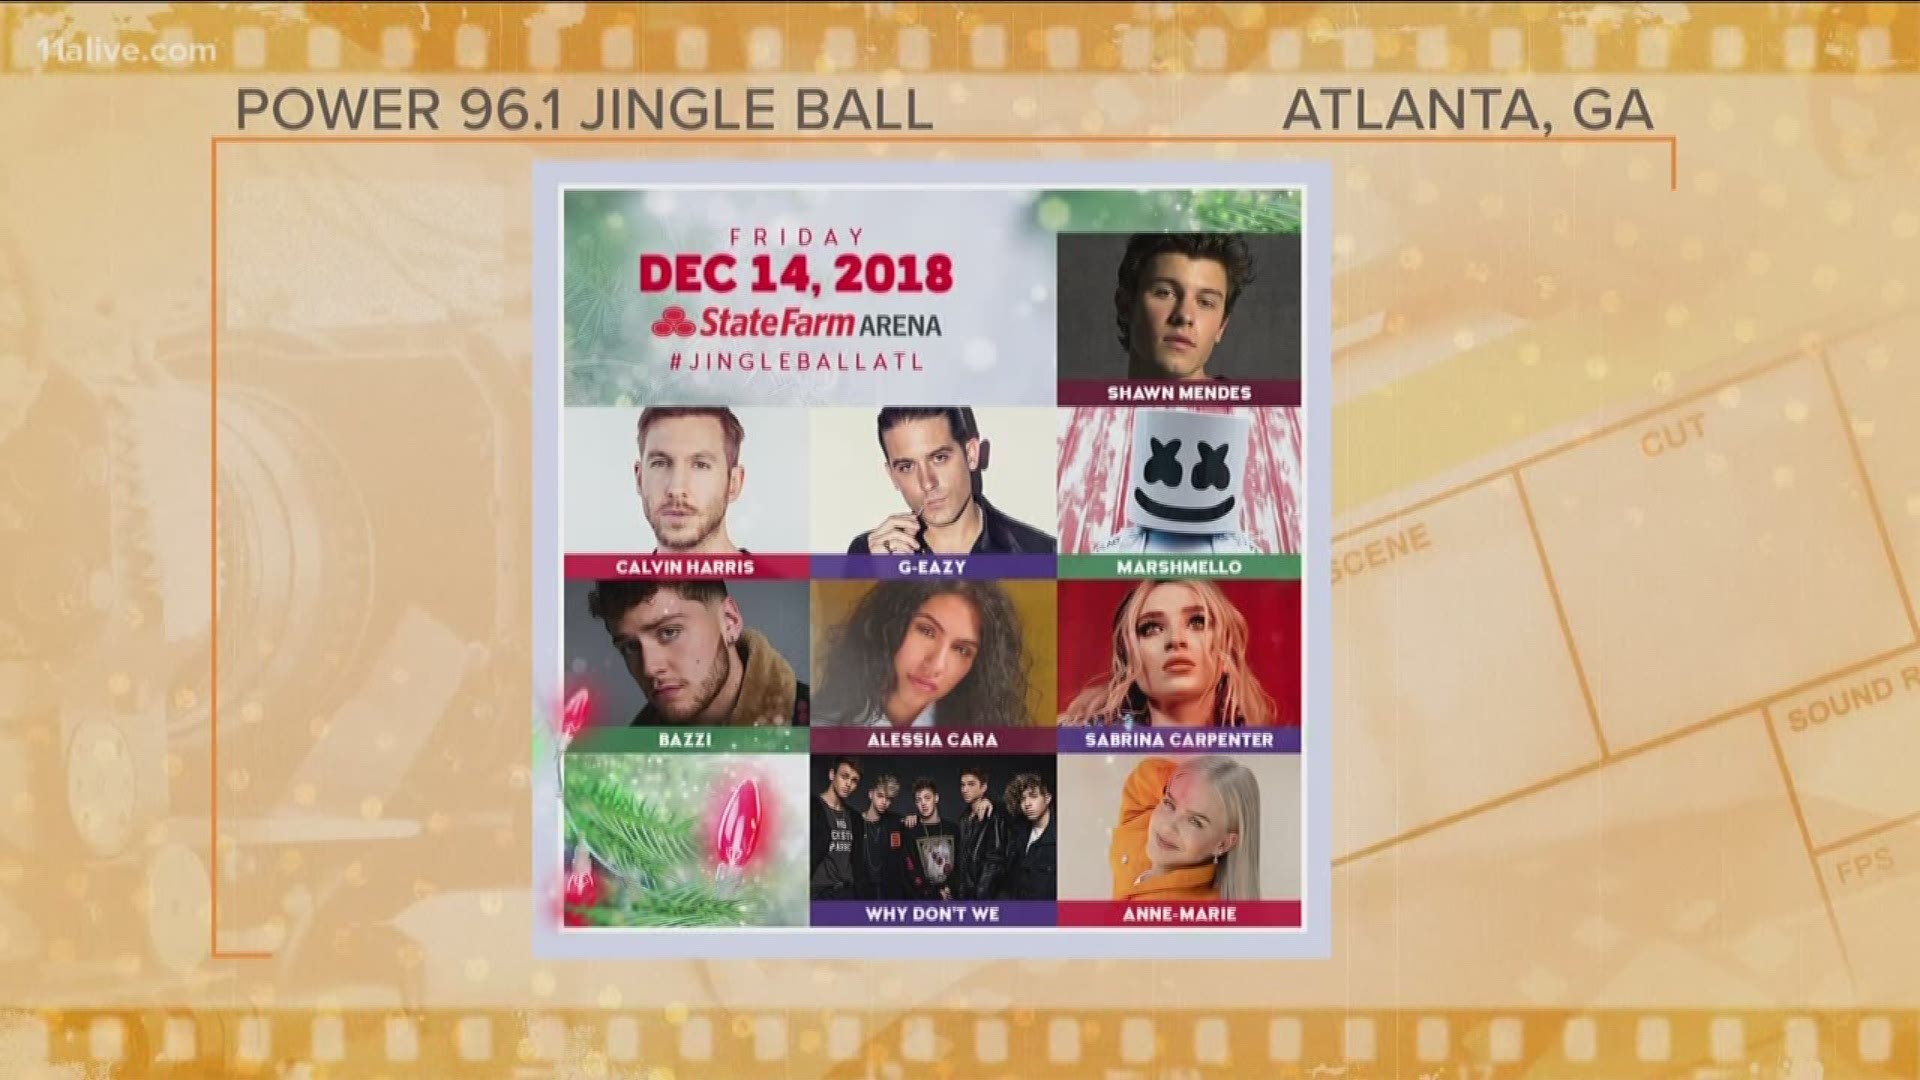 Power 96.1's Jingle Ball is happening tonight and The A-Scene will be there to speak to the stars.